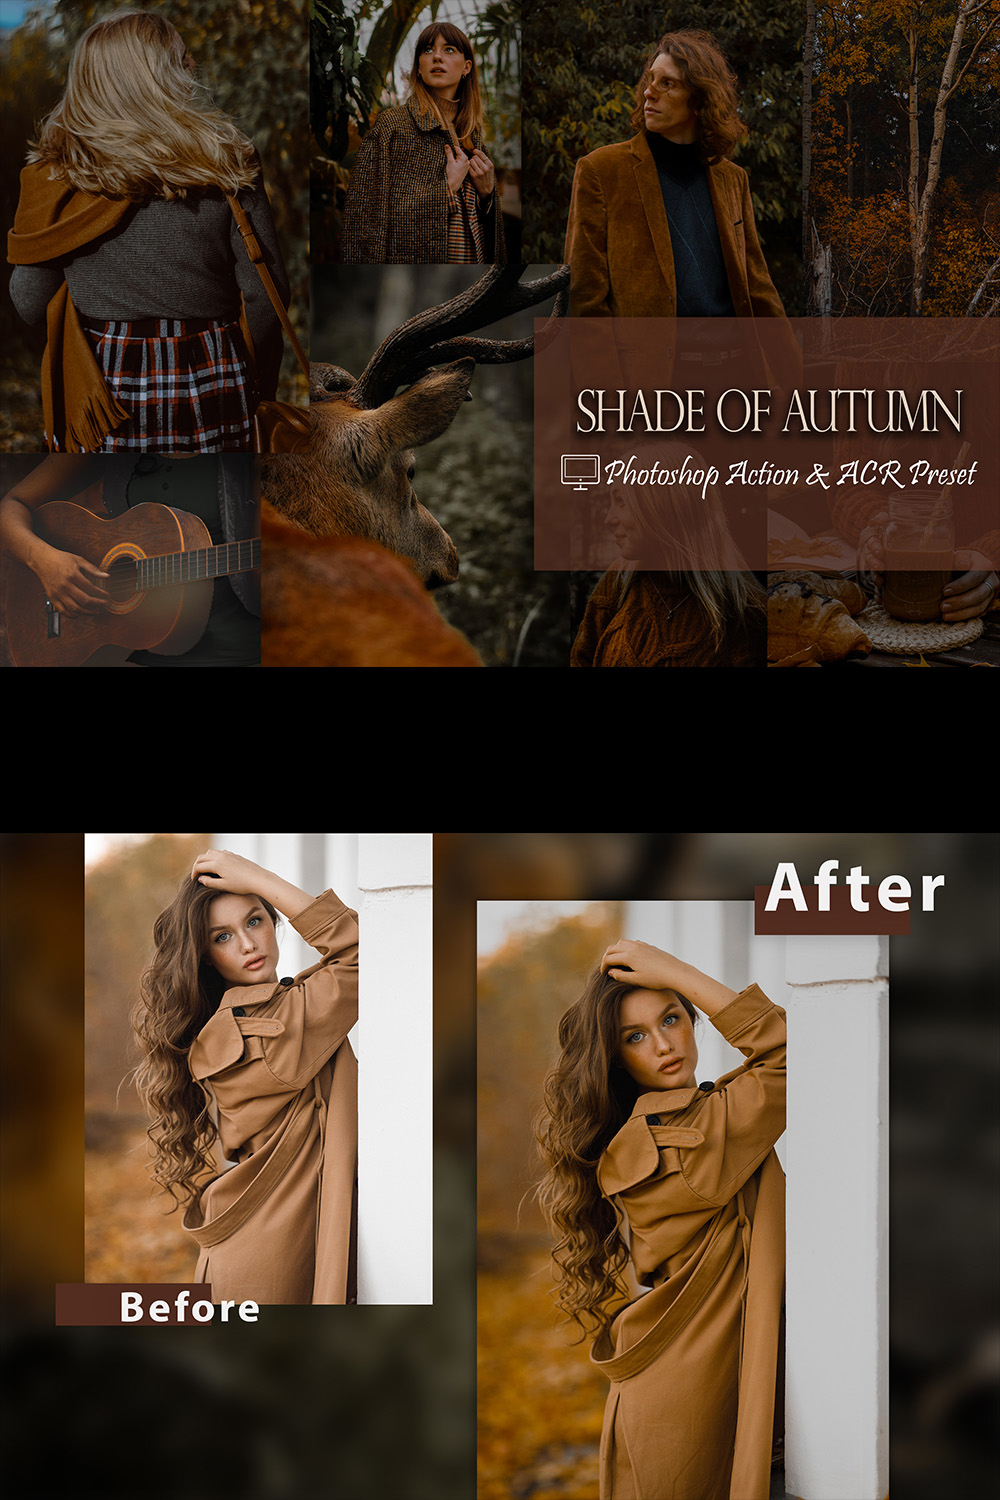 12 Photoshop Actions, Shade Of Autumn Ps Action, Fall ACR Preset, Saturation Filter, Lifestyle Theme For Instagram, Warm Brownie, Professional Portrait pinterest preview image.